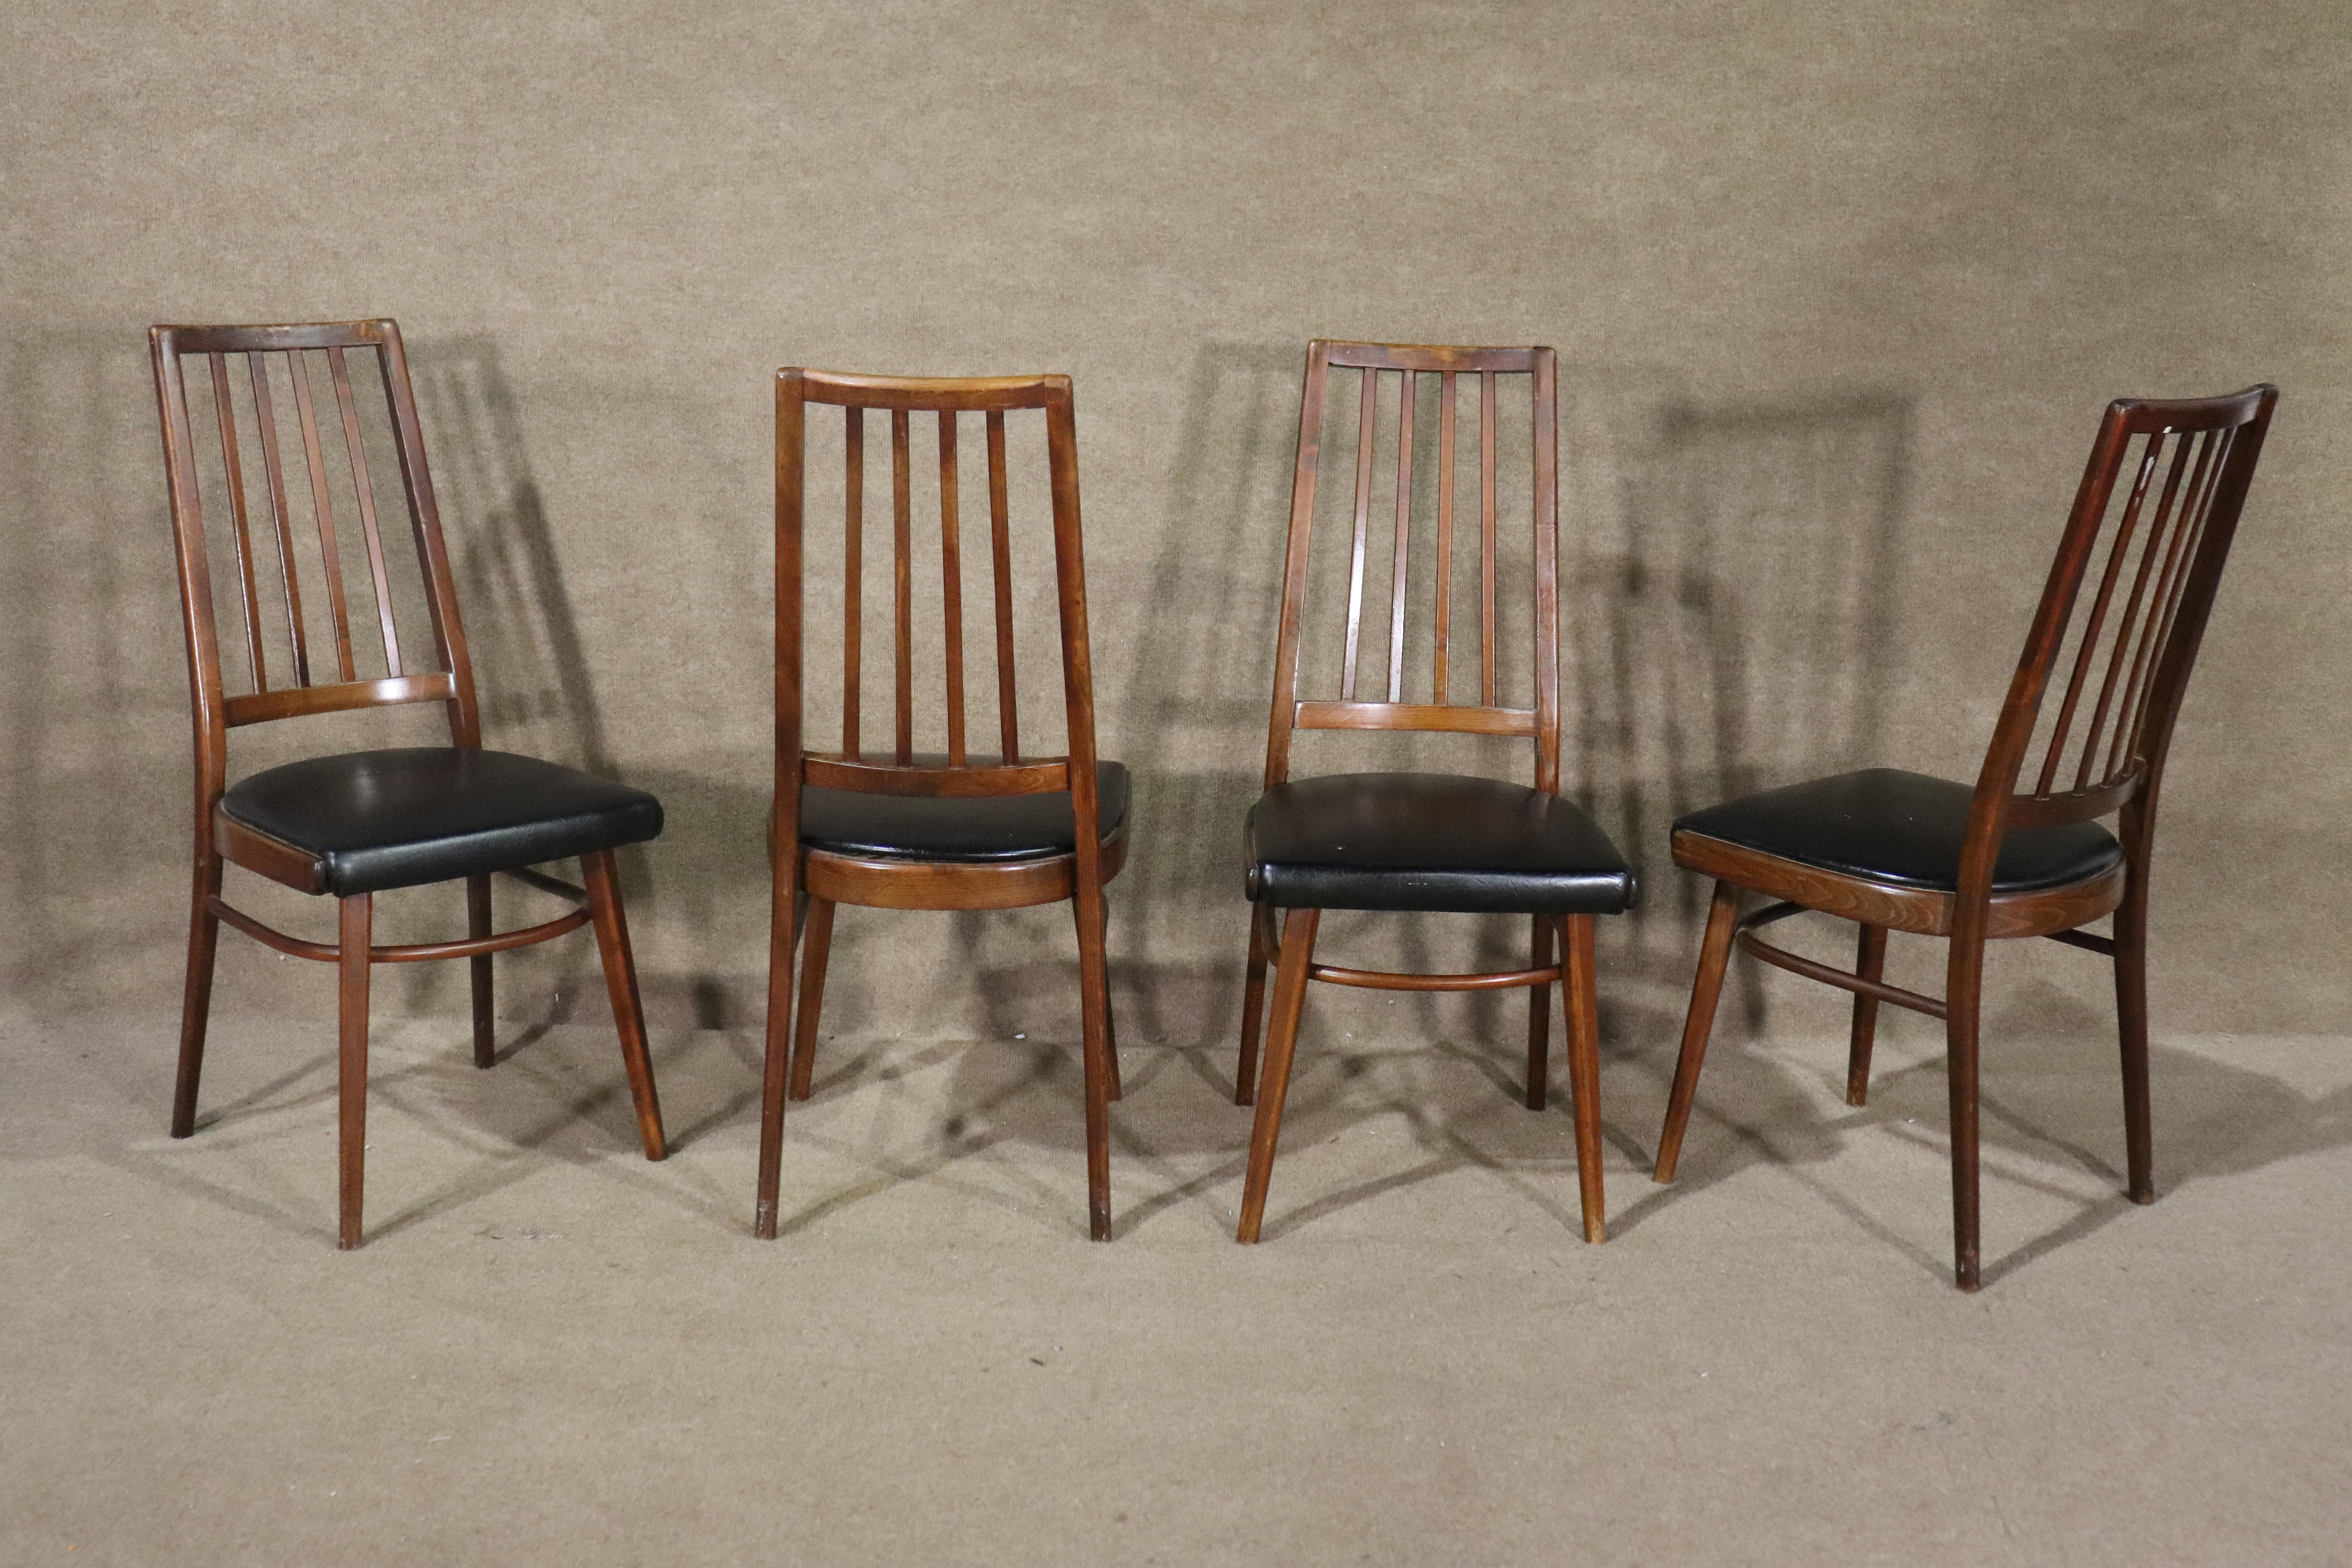 Set of four mid-century dining chairs in the style of Niels Koefoed's 'Eve' chairs. Made by Ligna Czechoslovakia with long, slender back rails and bentwood leg runner.
Please confirm location NY or NJ